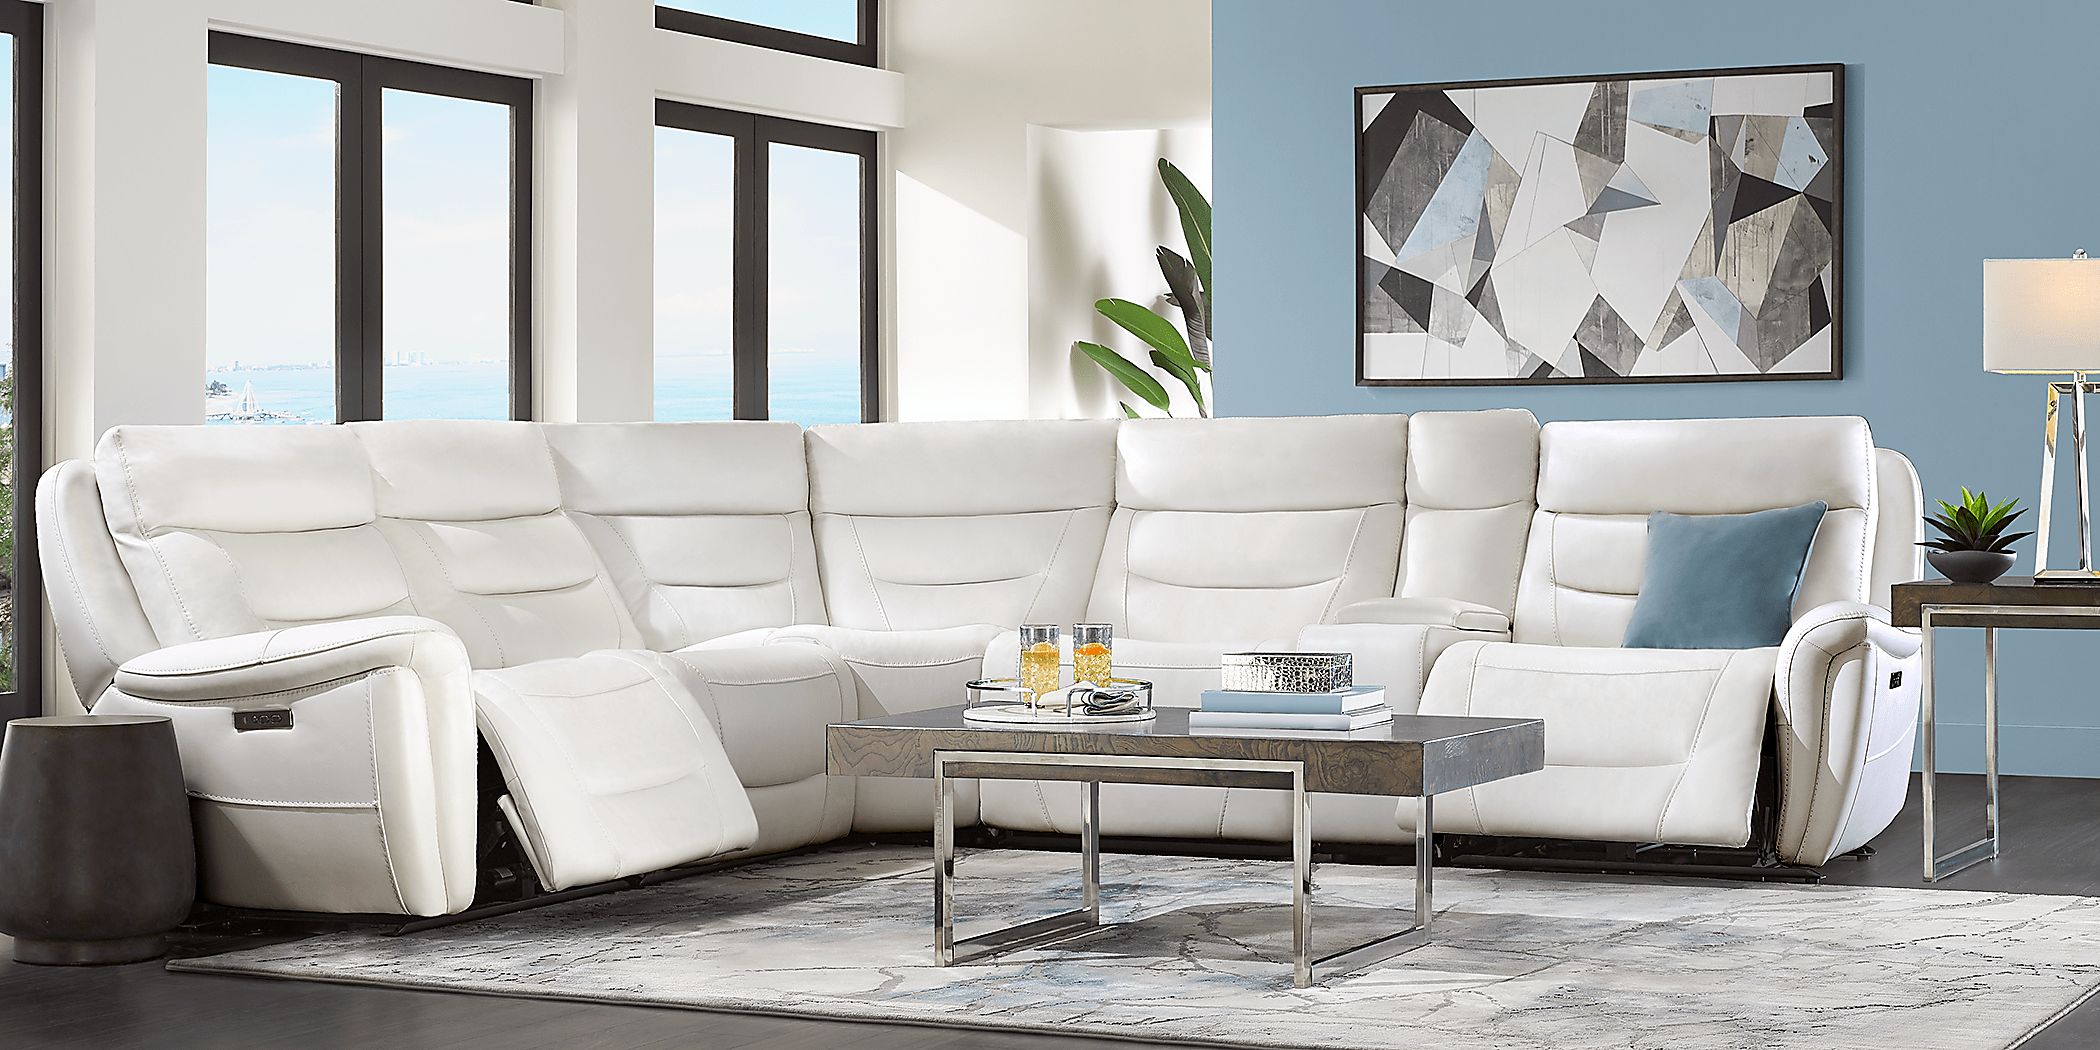 Regis Park White Leather 9 Pc Dual Power Reclining Sectional Living Room